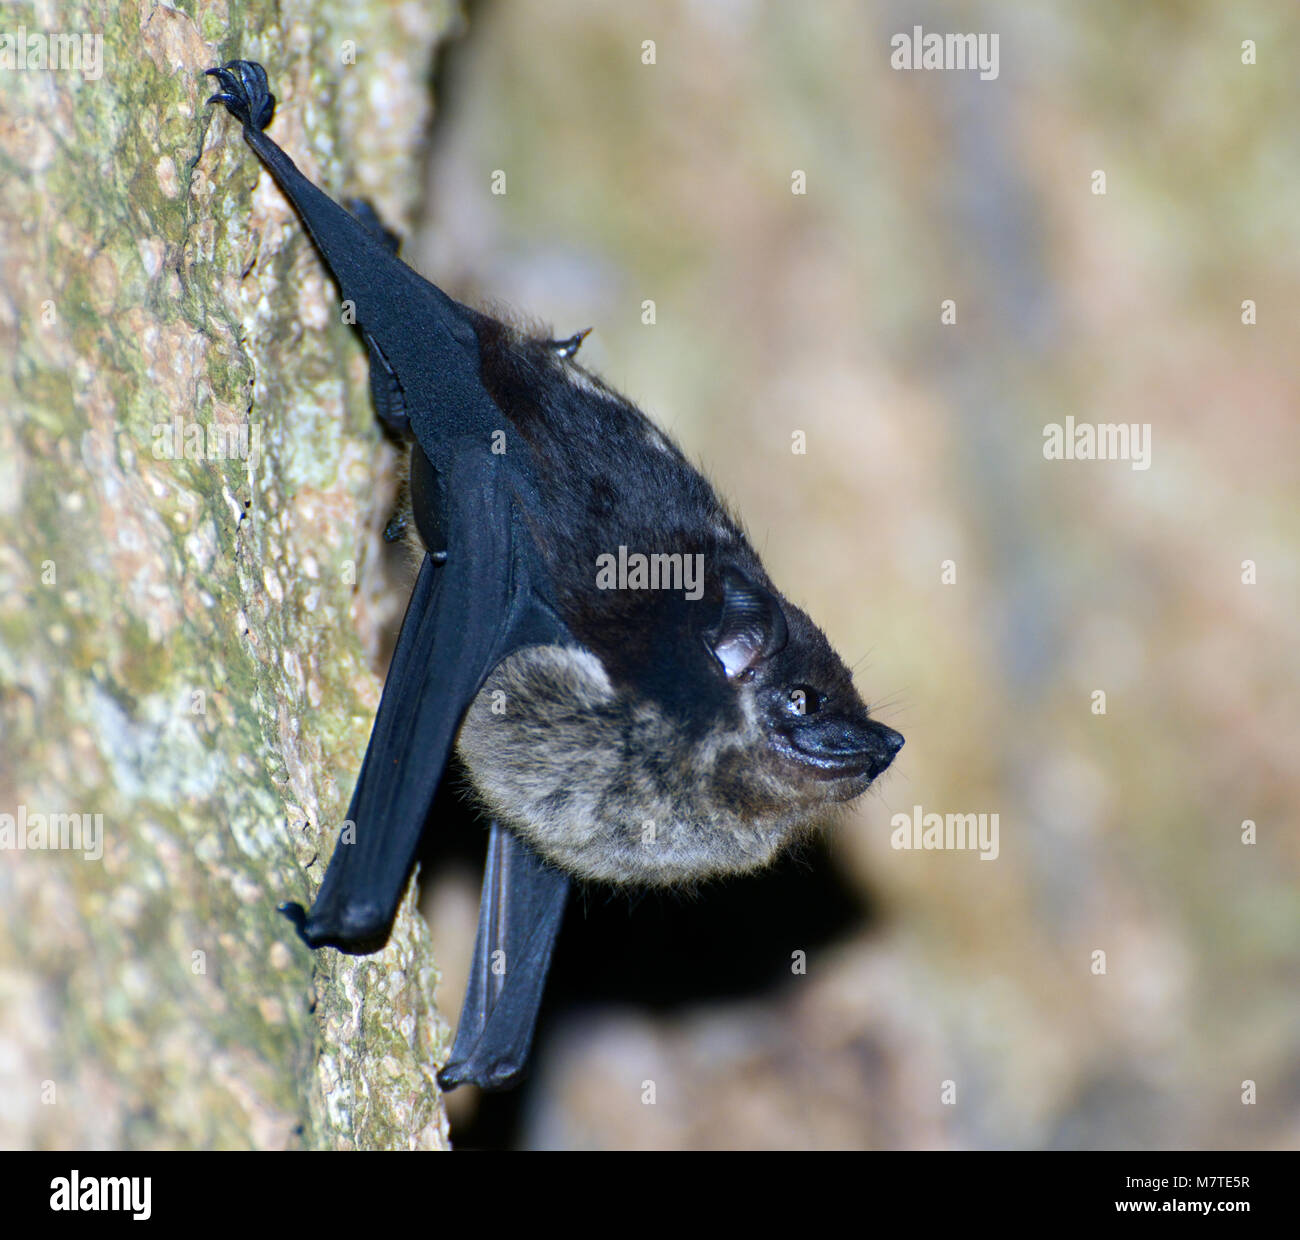 Greater white-lined bat, Saccoptryx bilineata, in rainforest, Chilamate, Costa Rica Stock Photo